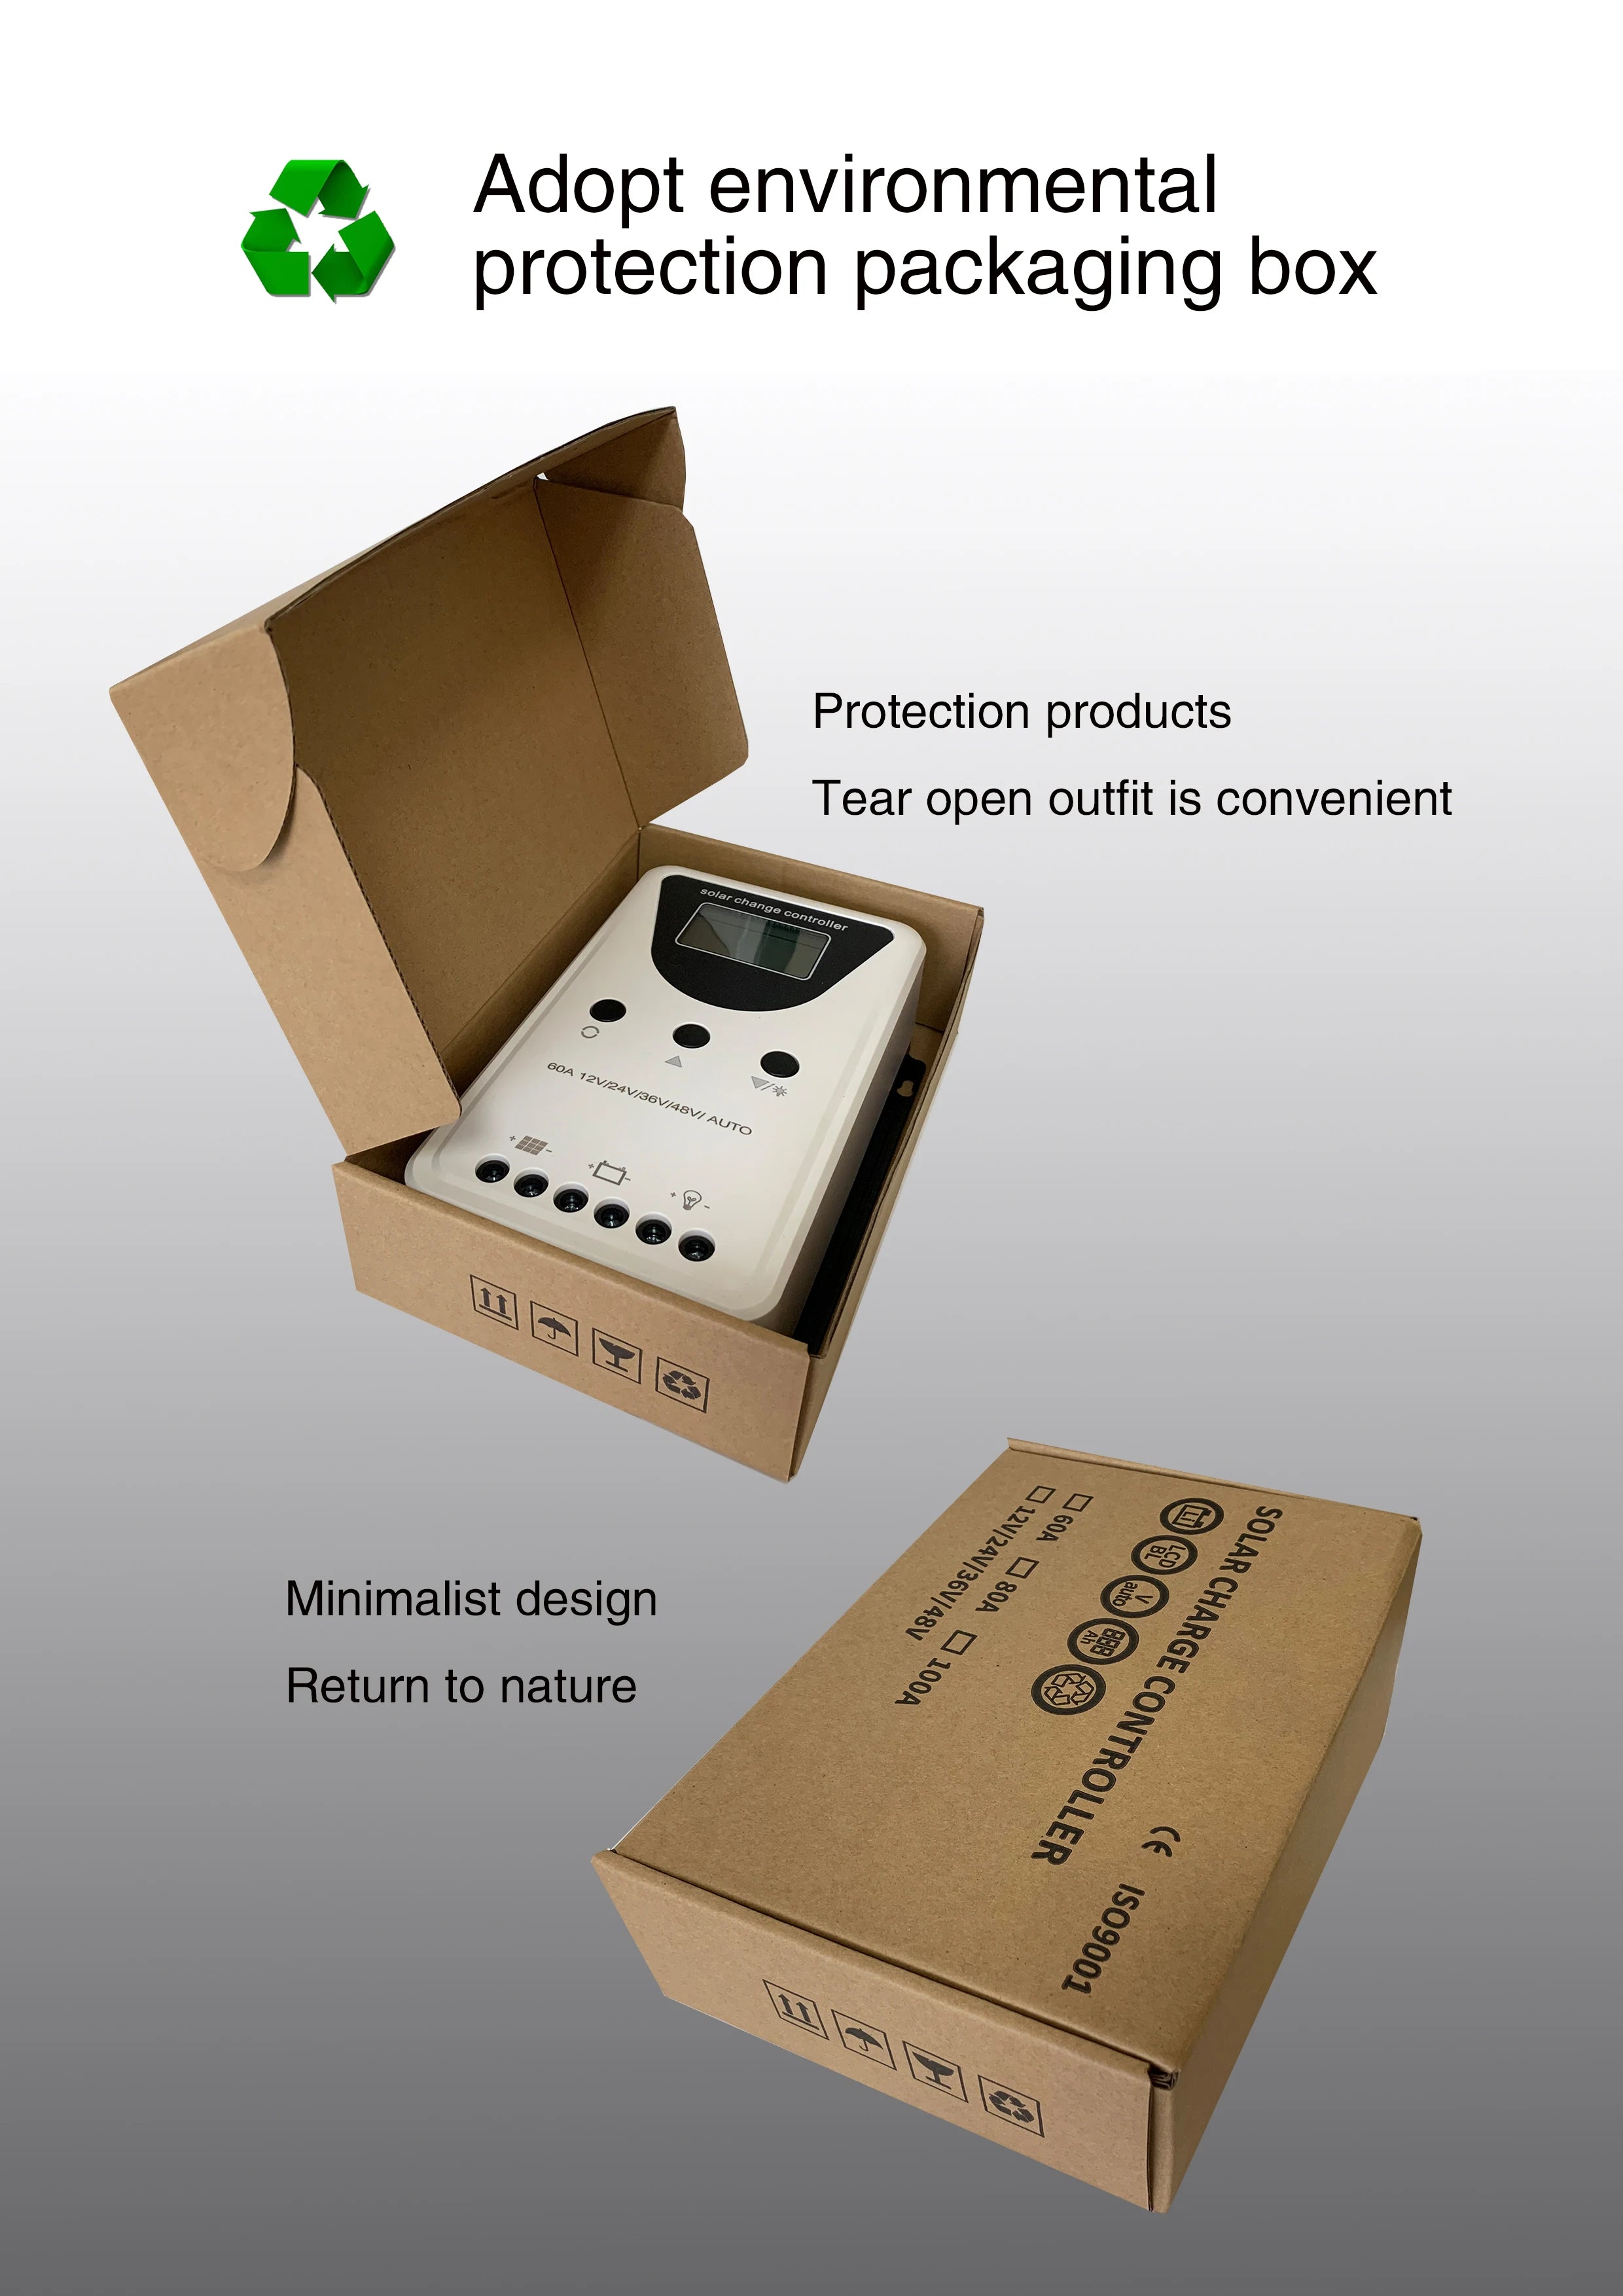 Solar-powered battery controller with eco-friendly packaging and minimal design.